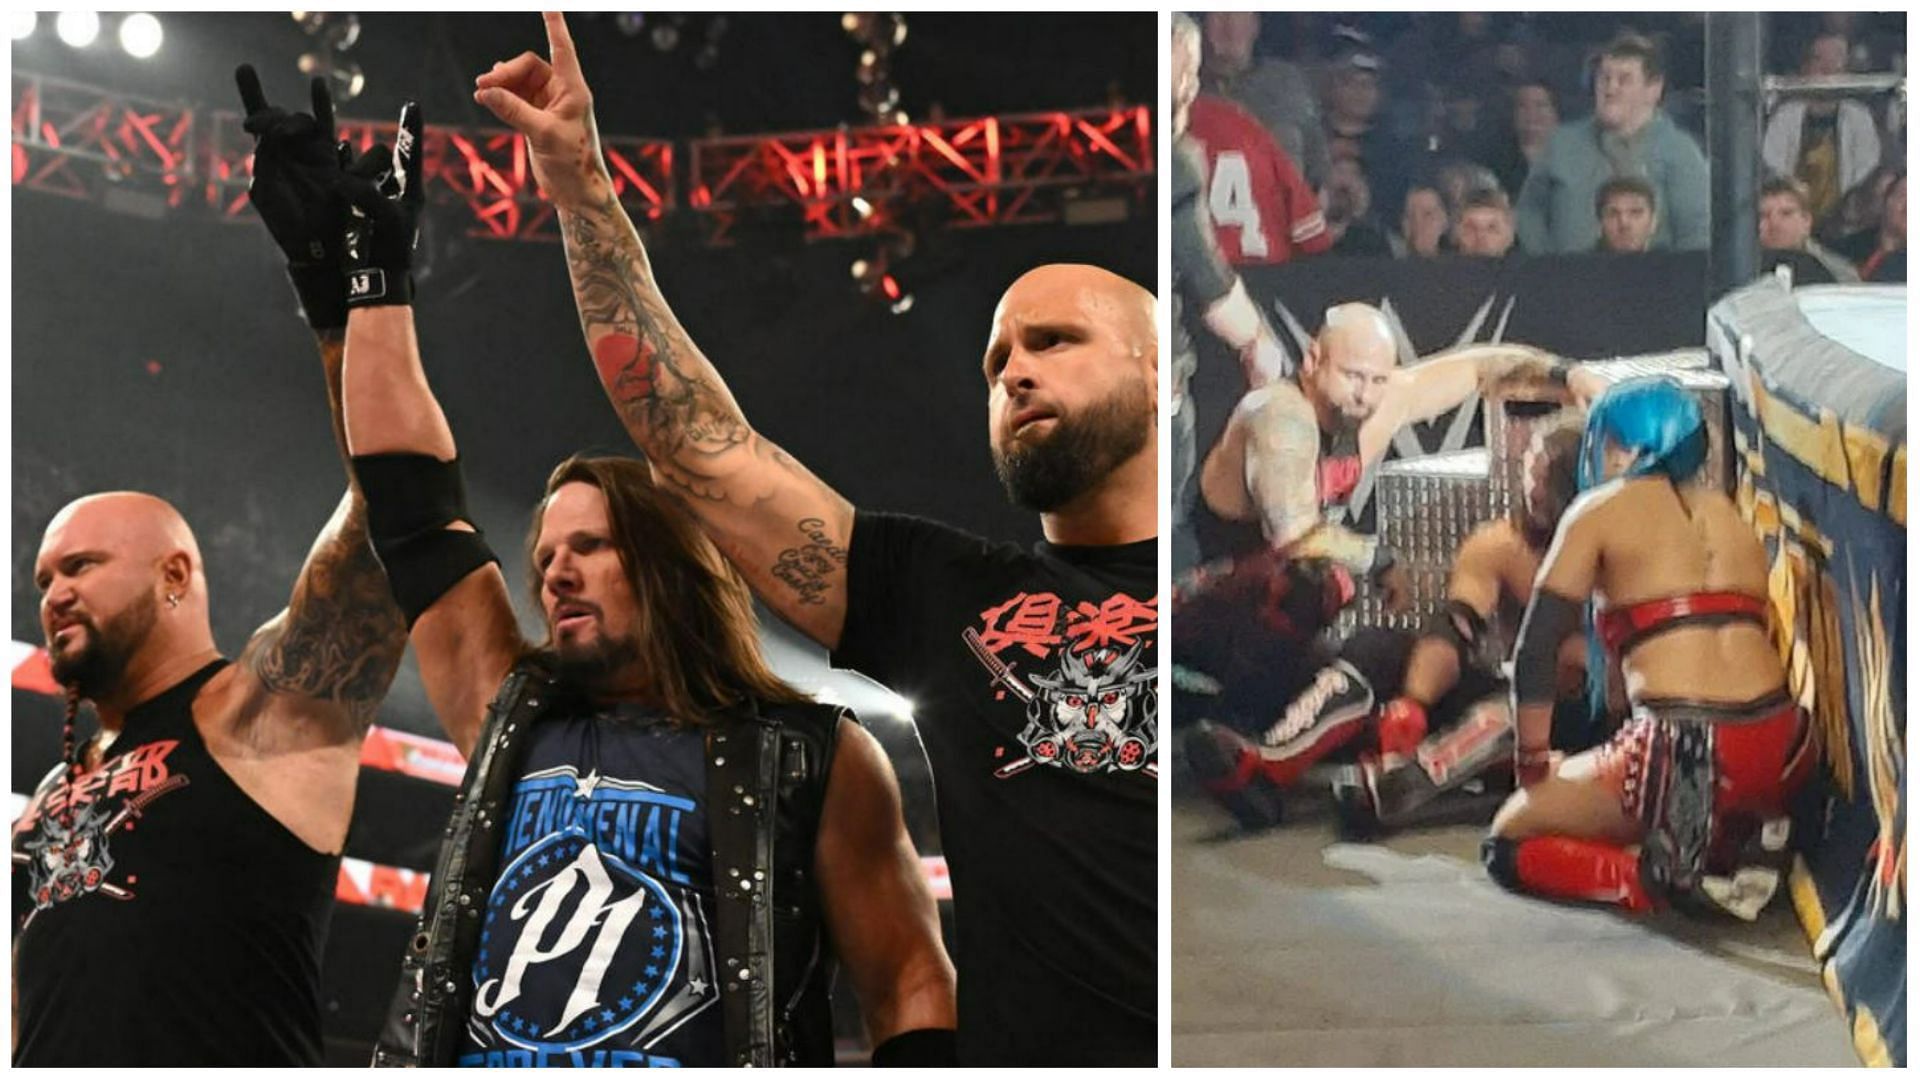 WWE RAW Superstars AJ Styles, Luke Gallows, and Karl Anderson of The O.C. (left), AJ Styles is injured (right)